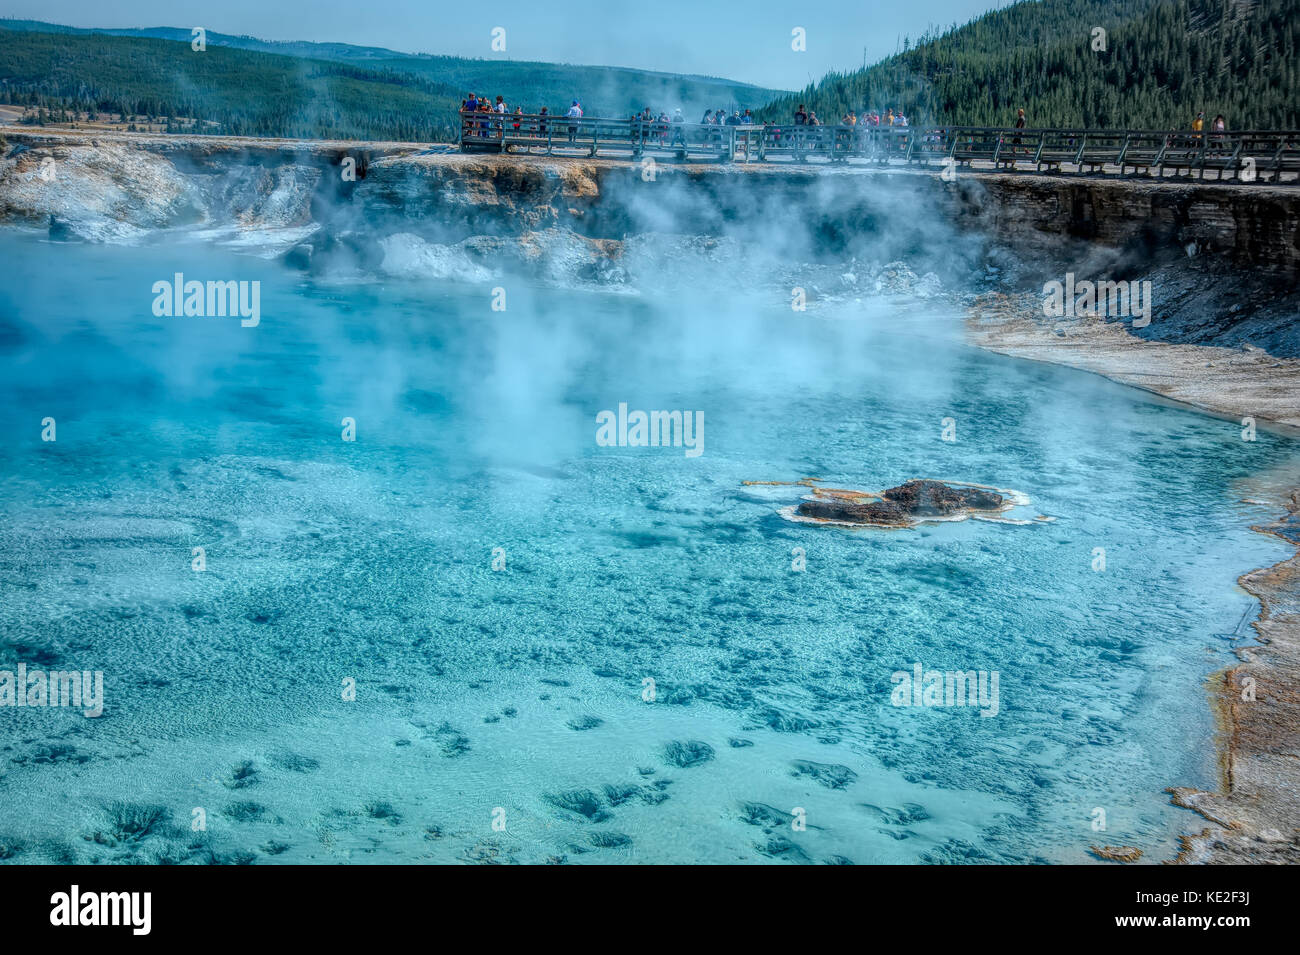 August 22, 2017 - Excelsior Geyser Crater in Yellowstone National Park Stock Photo